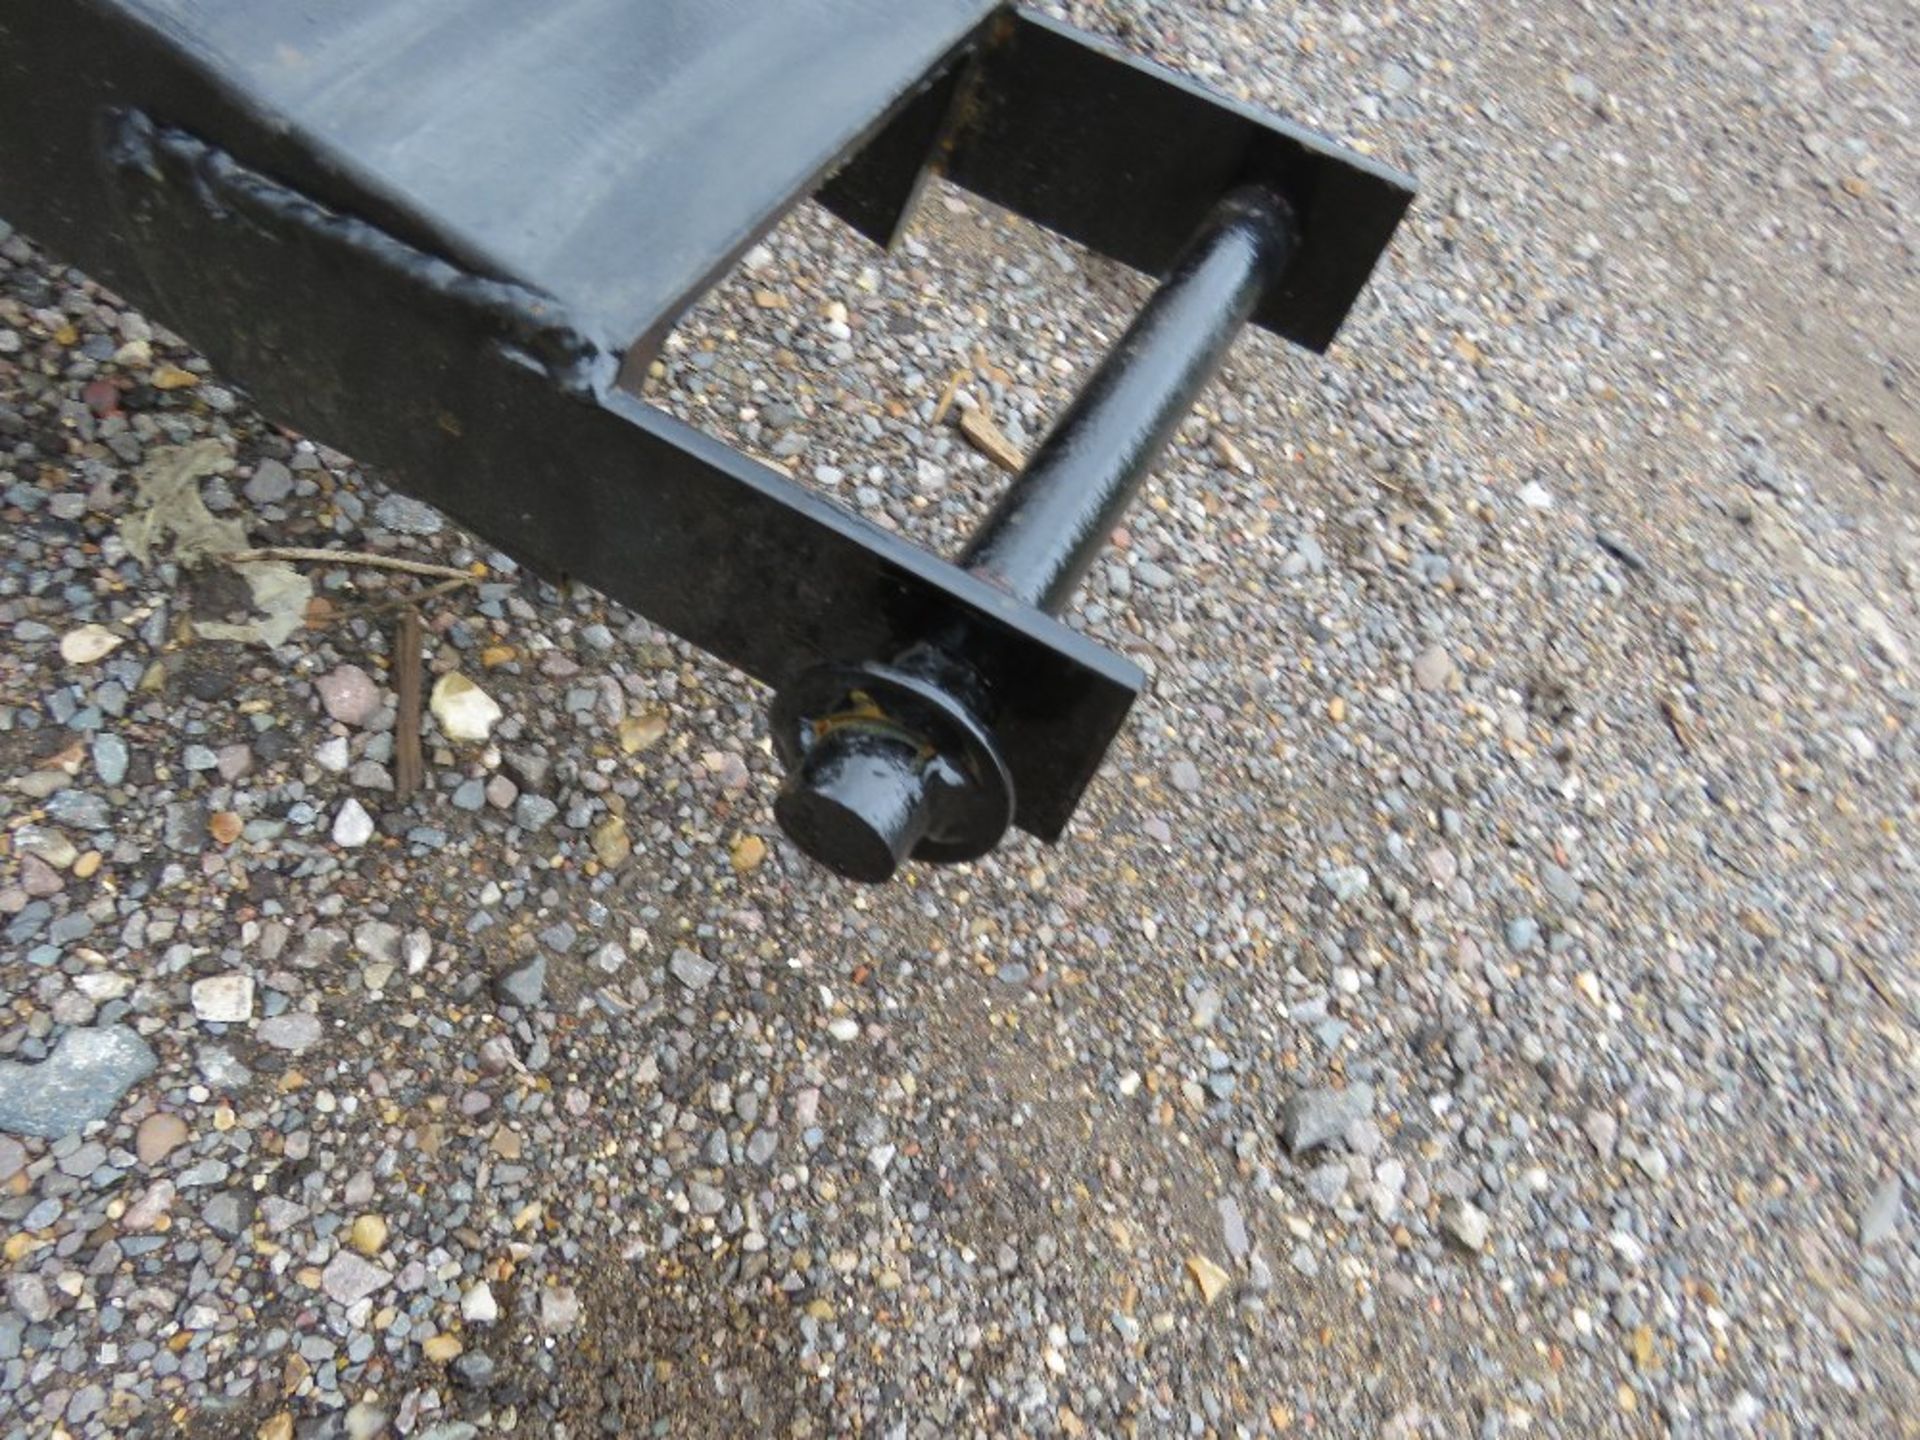 PAIR OF FORKLIFT EXTENSION TINES / SLEEVES 9FT WIDE X 7" WIDTH APPROX, WITH LOCKING PINS. - Image 2 of 3